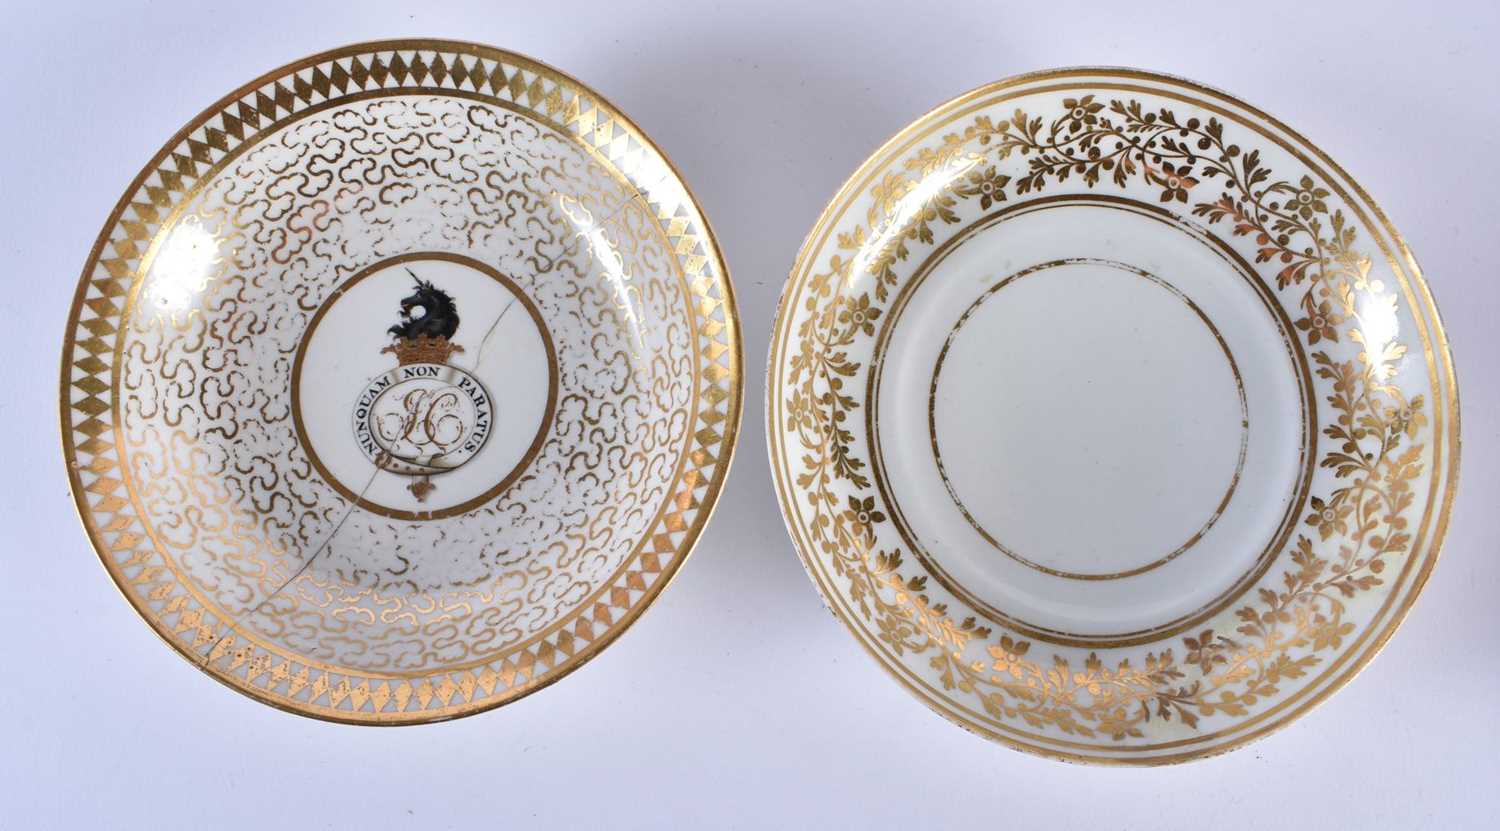 A LATE 18TH/19TH CENTURY CHAMBERLAINS WORCESTER GILT PAINTED TEAWARES. Largest 8 cm x 15 cm. (qty) - Image 2 of 13